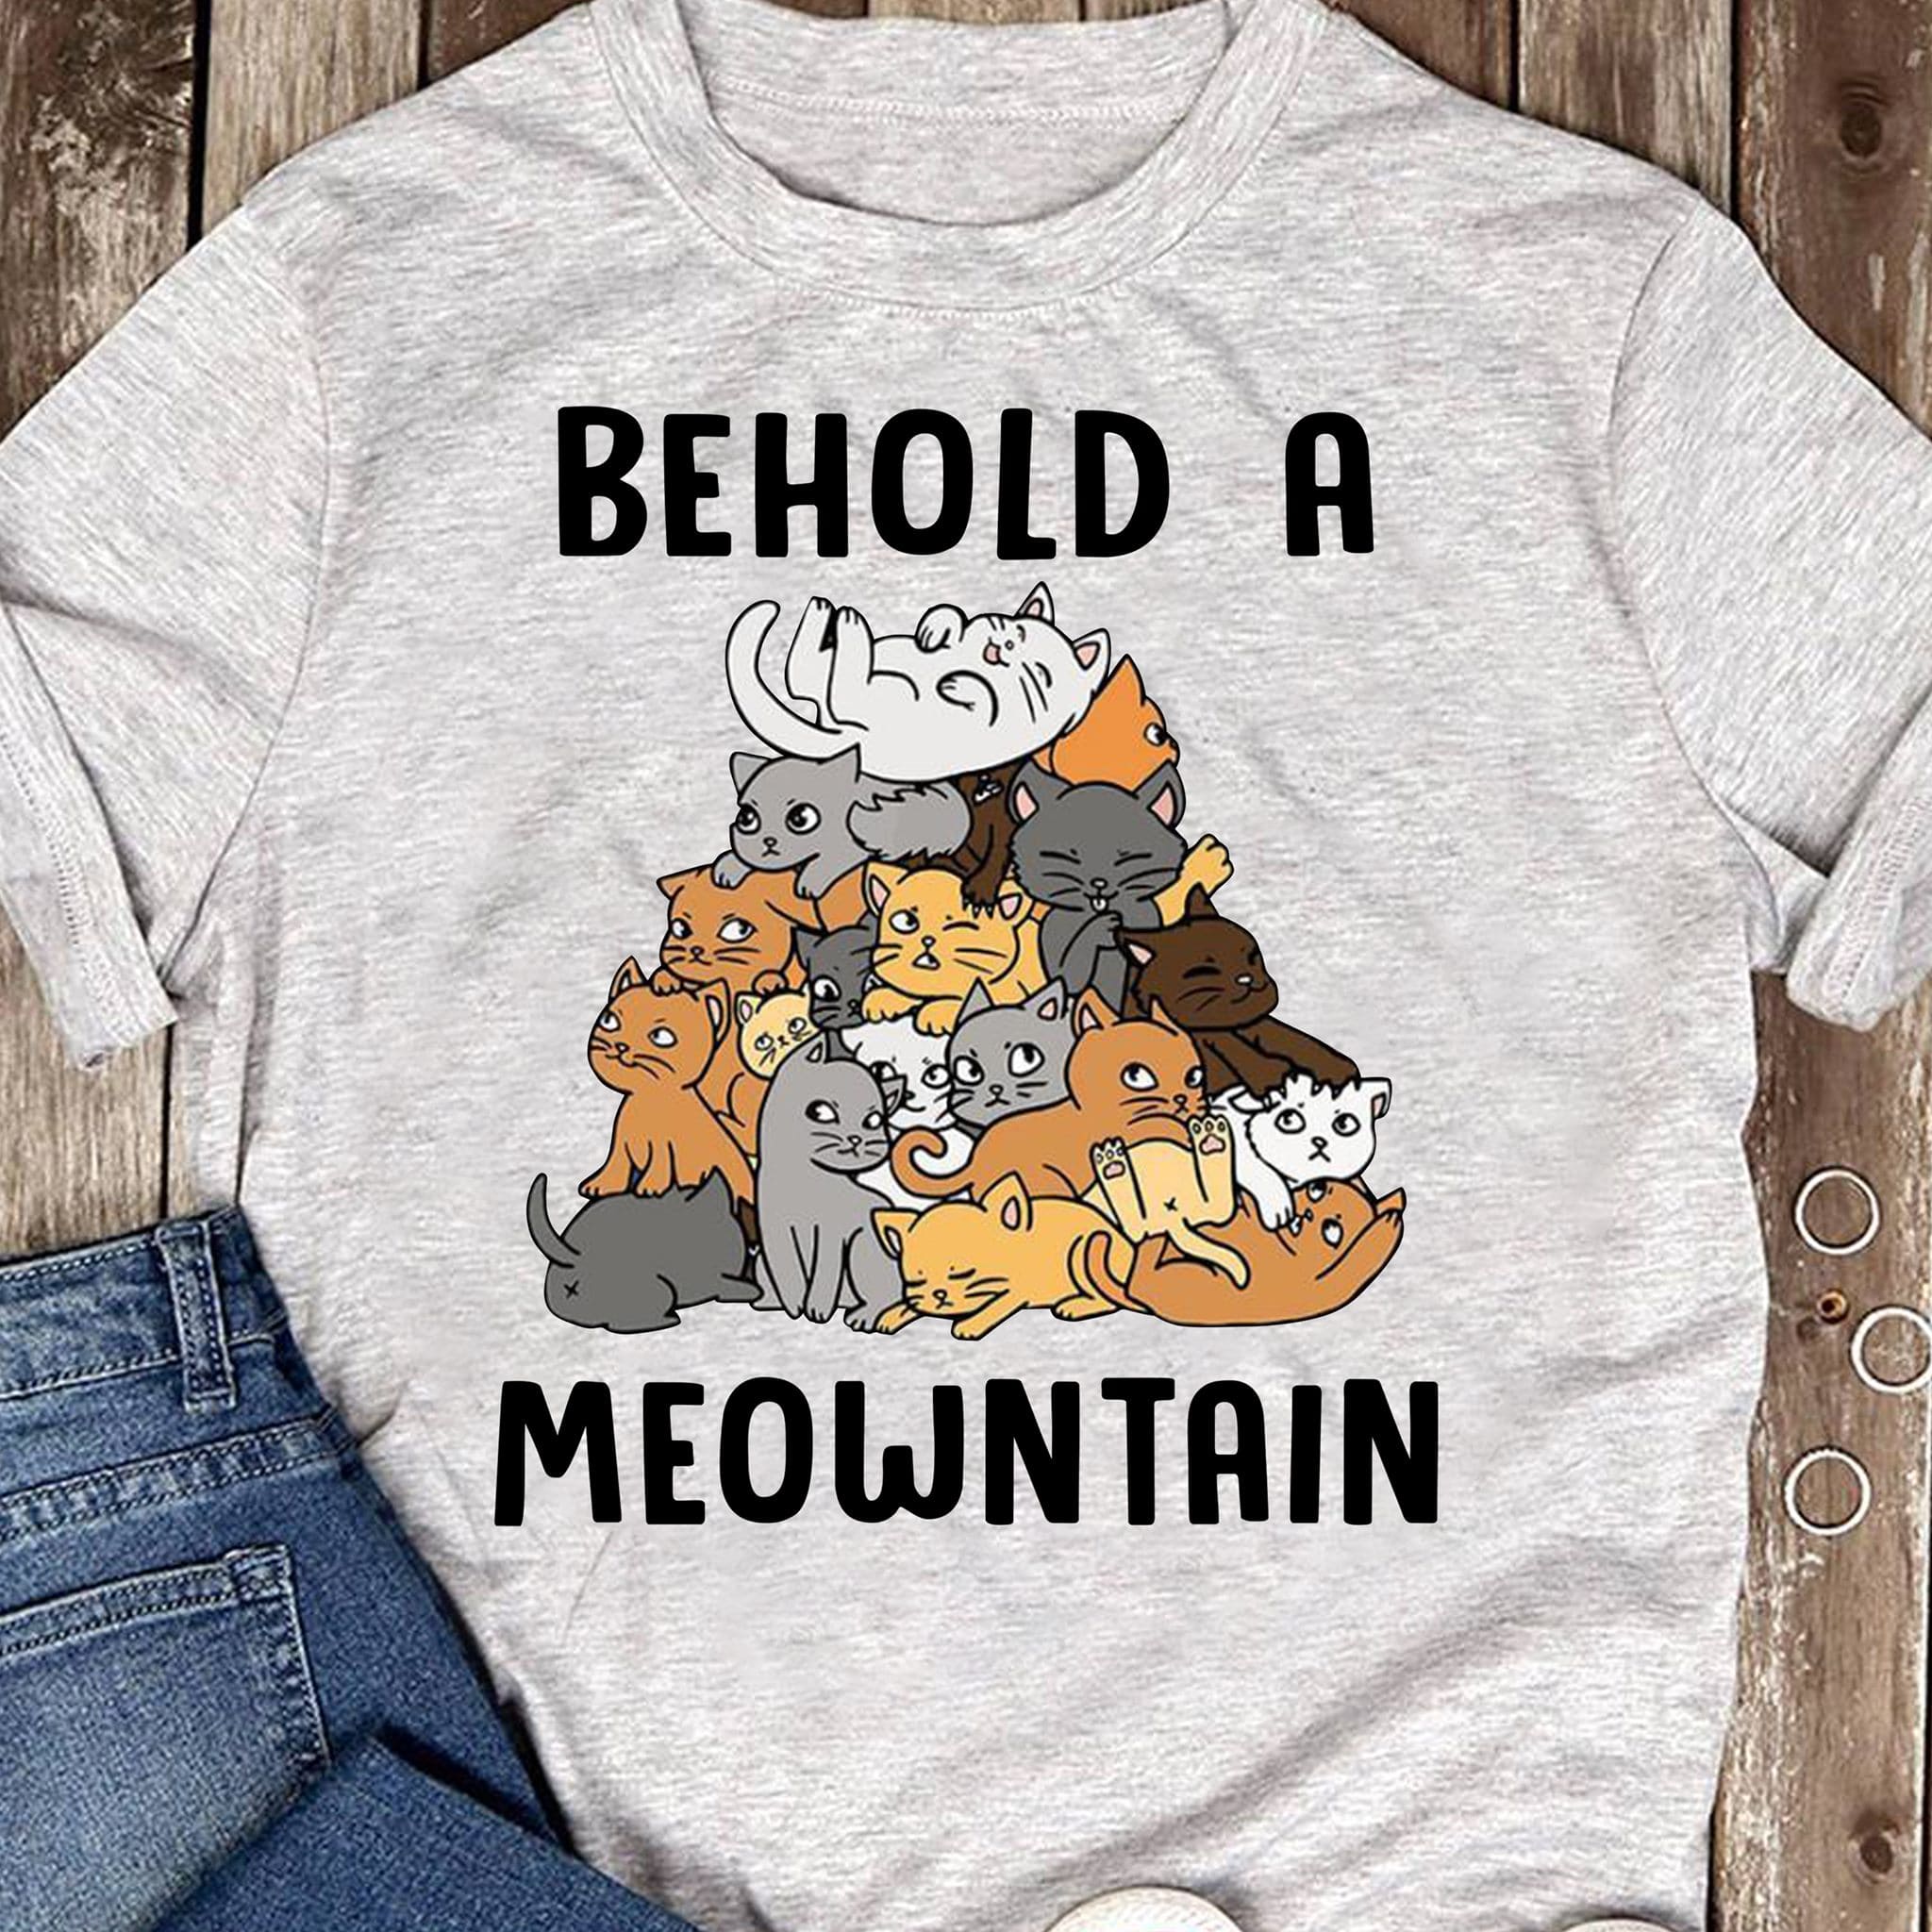 Behold a meowntain - Mountain of cats, gift for cat lover